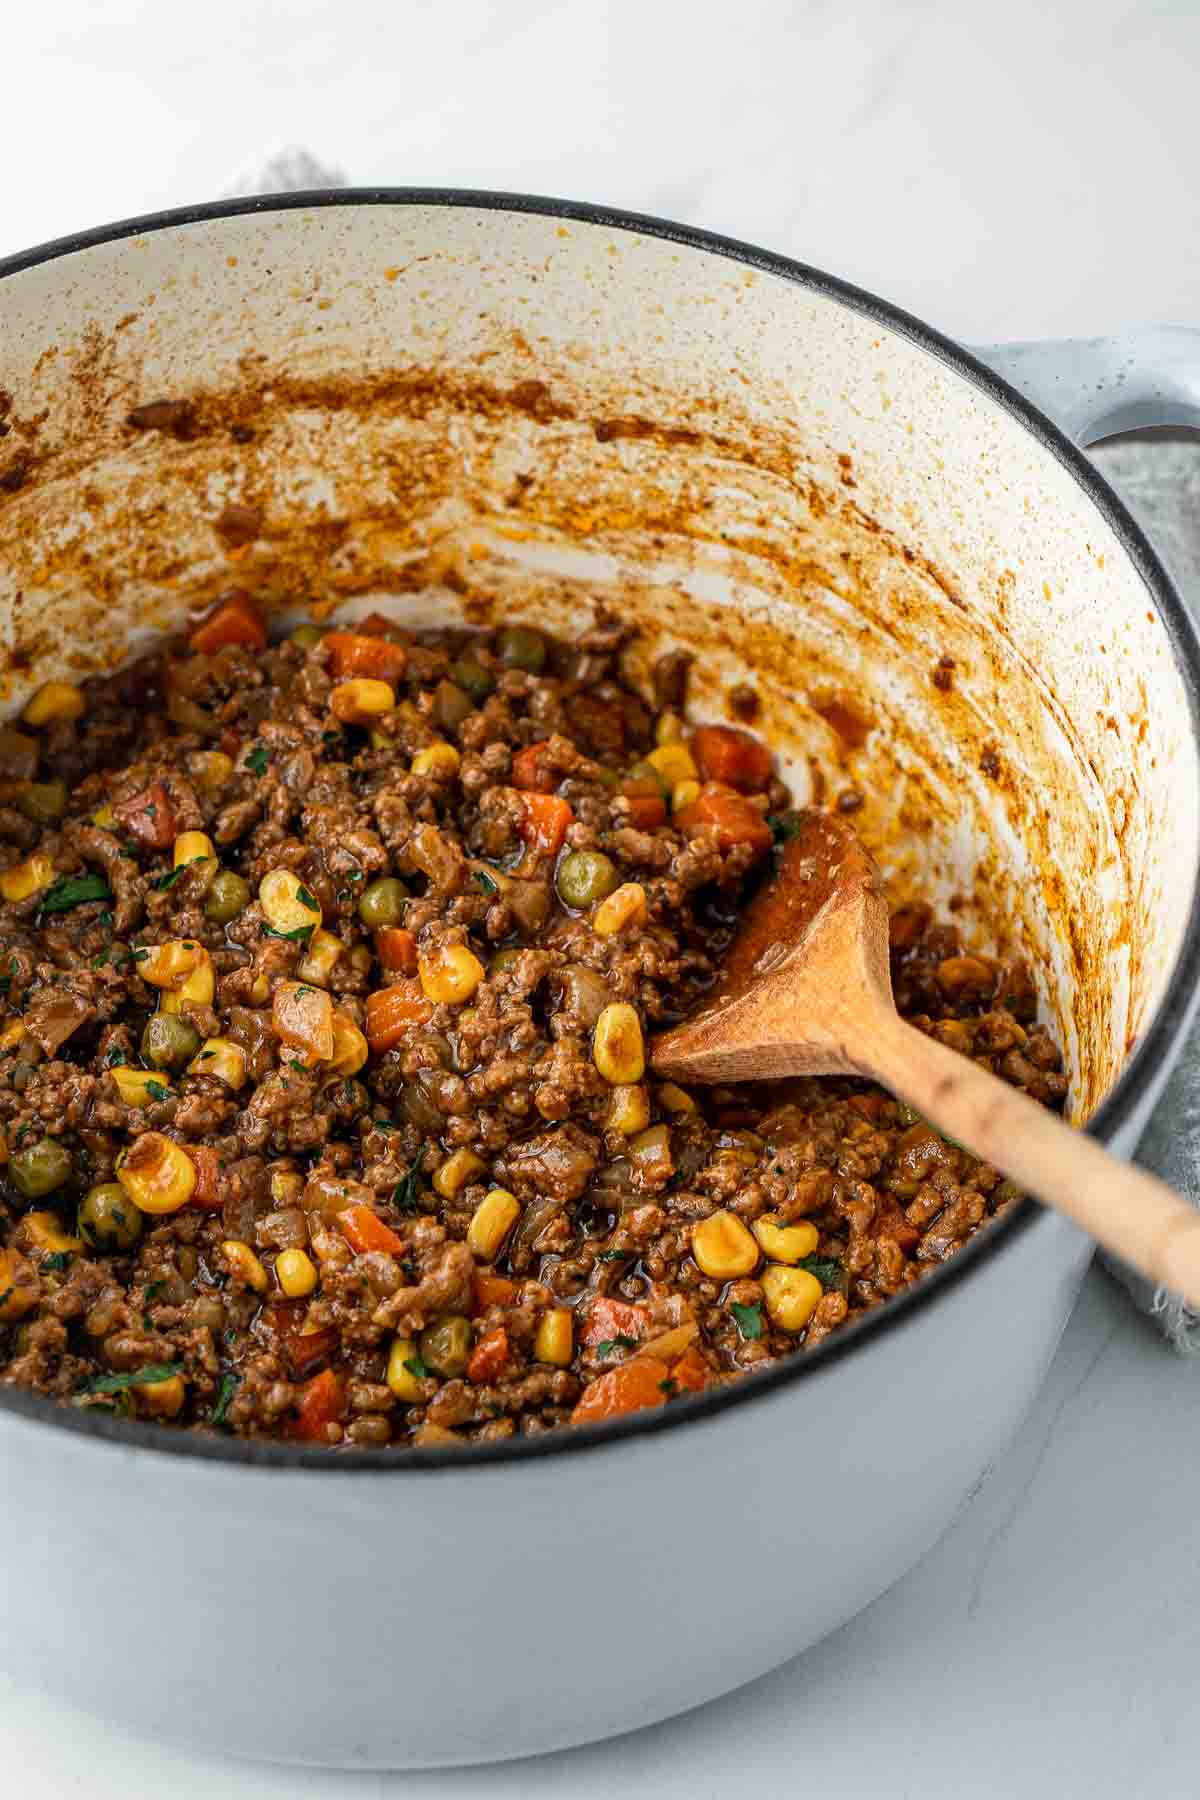 Savoury mince in a large pot with a wooden spoon.